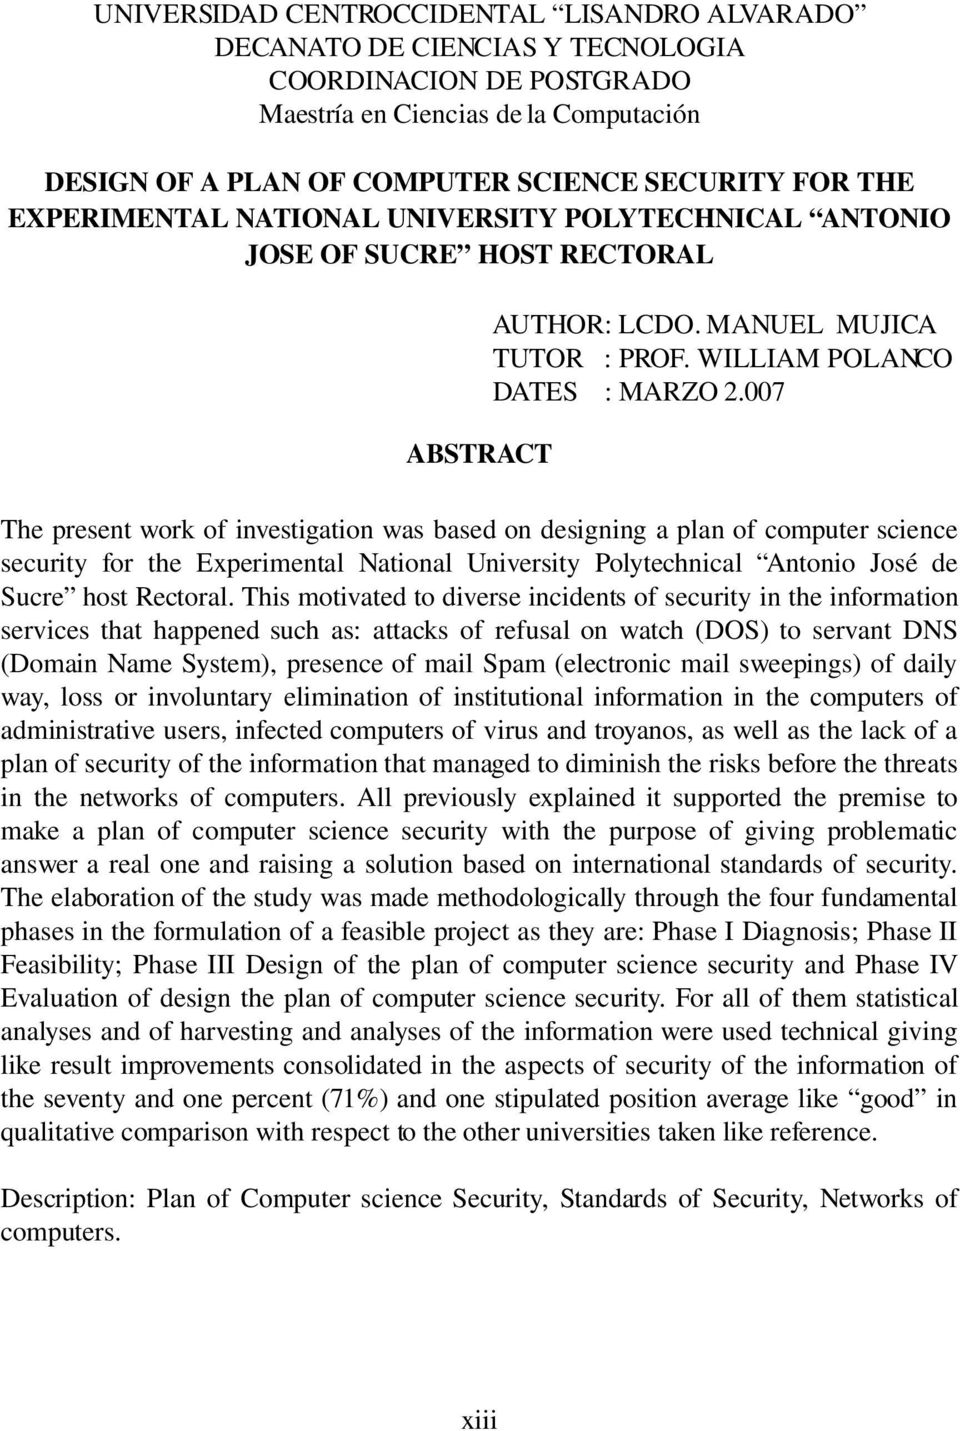 007 ABSTRACT Thepresentworkofinvestigationwasbasedondesigningaplanofcomputerscience security for the Experimental National University Polytechnical Antonio José de Sucre hostrectoral.